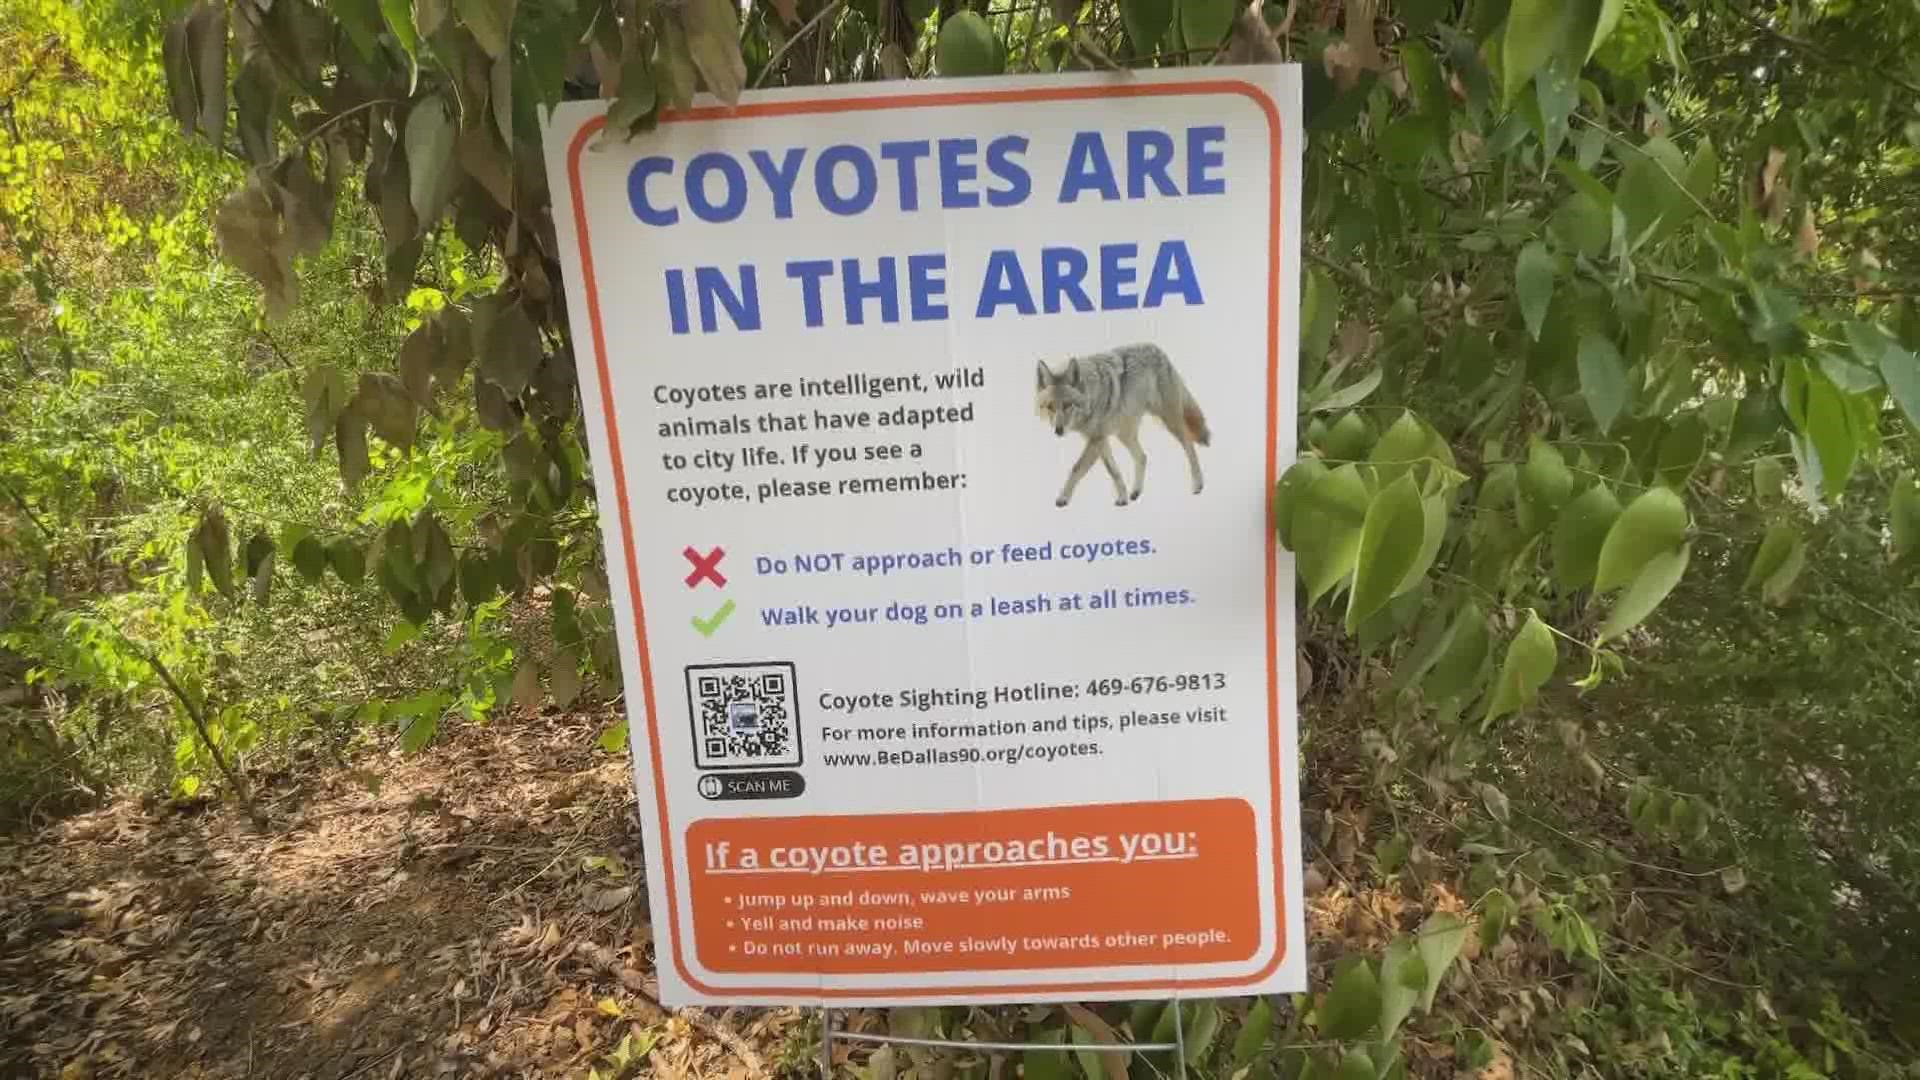 Residents near Peter Pan Park are on high alert after several reports of coyote sightings. Some neighbors say the coyotes have been seen near park playgrounds.